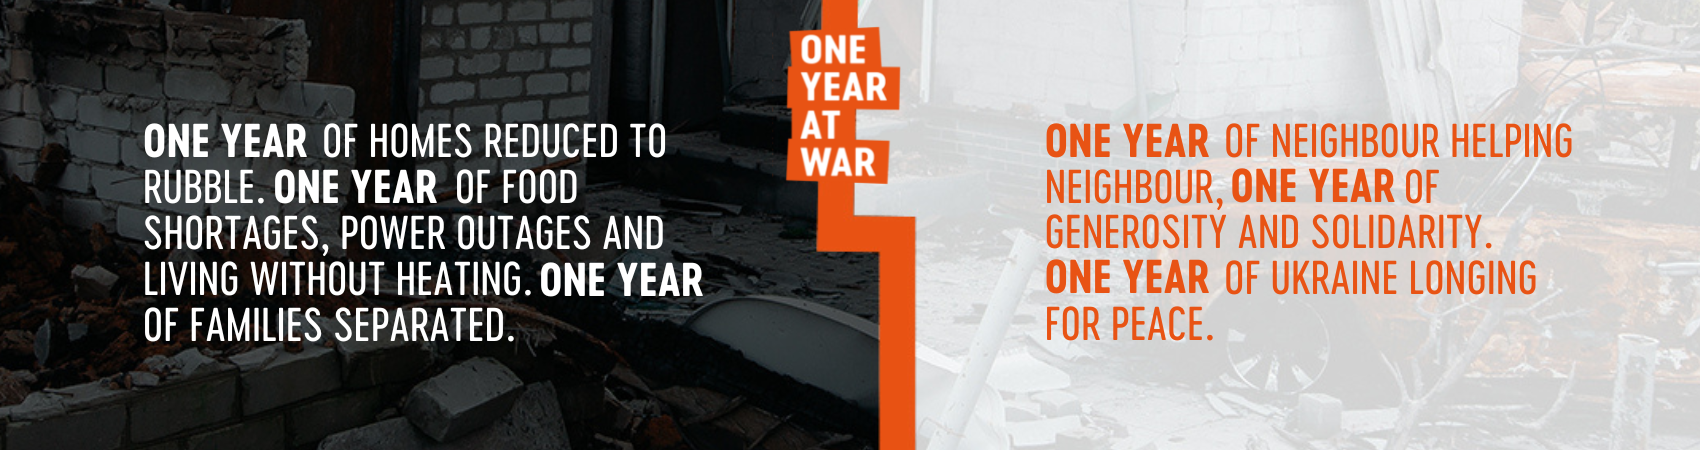 Ukraine - One Year at War - Mission Without Borders